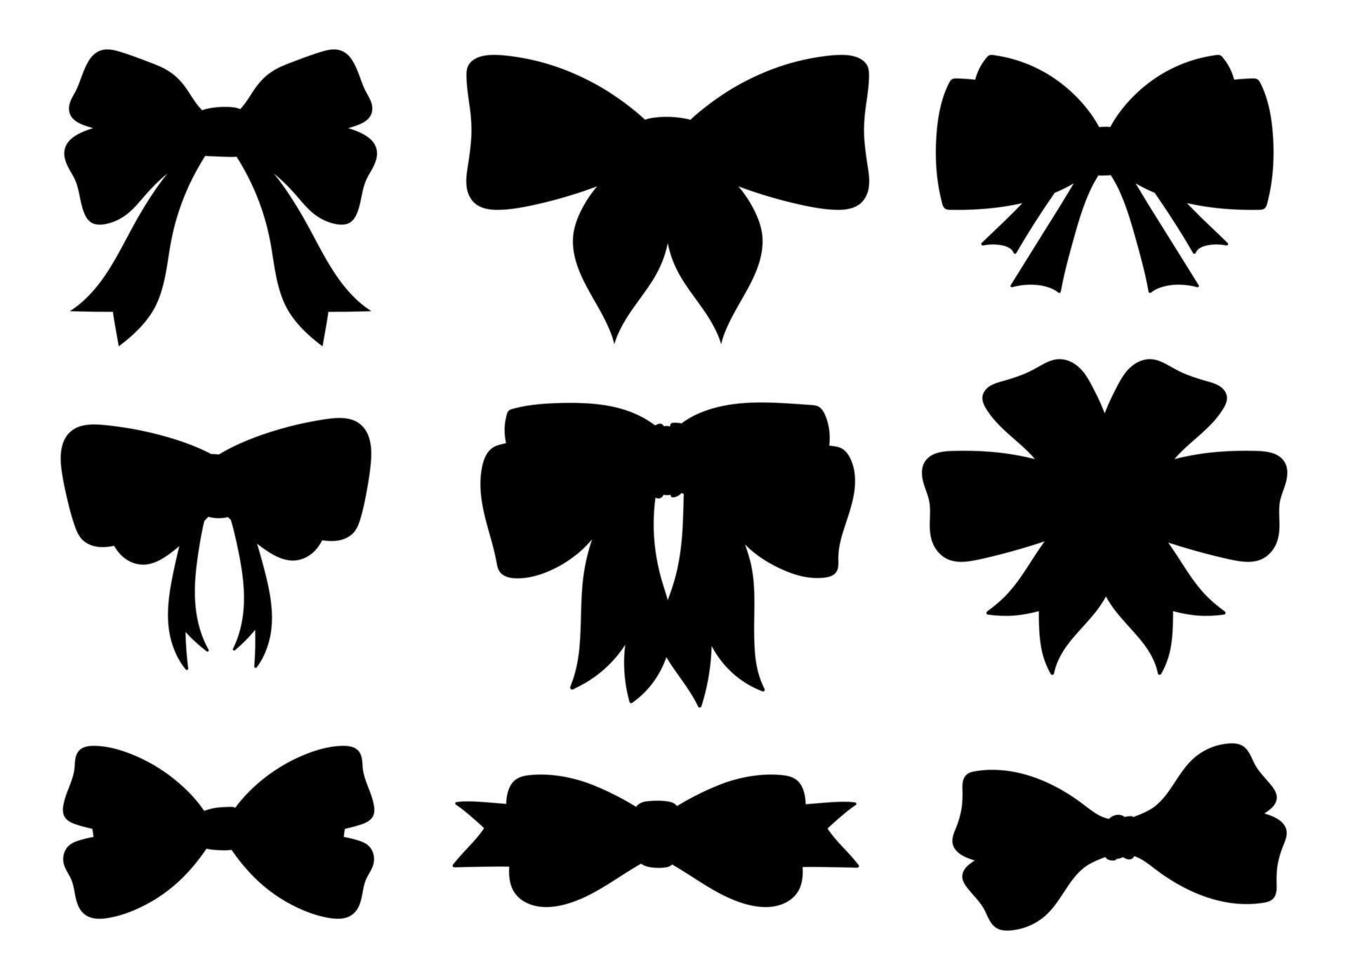 Bow tie vector design illustration isolated on white background